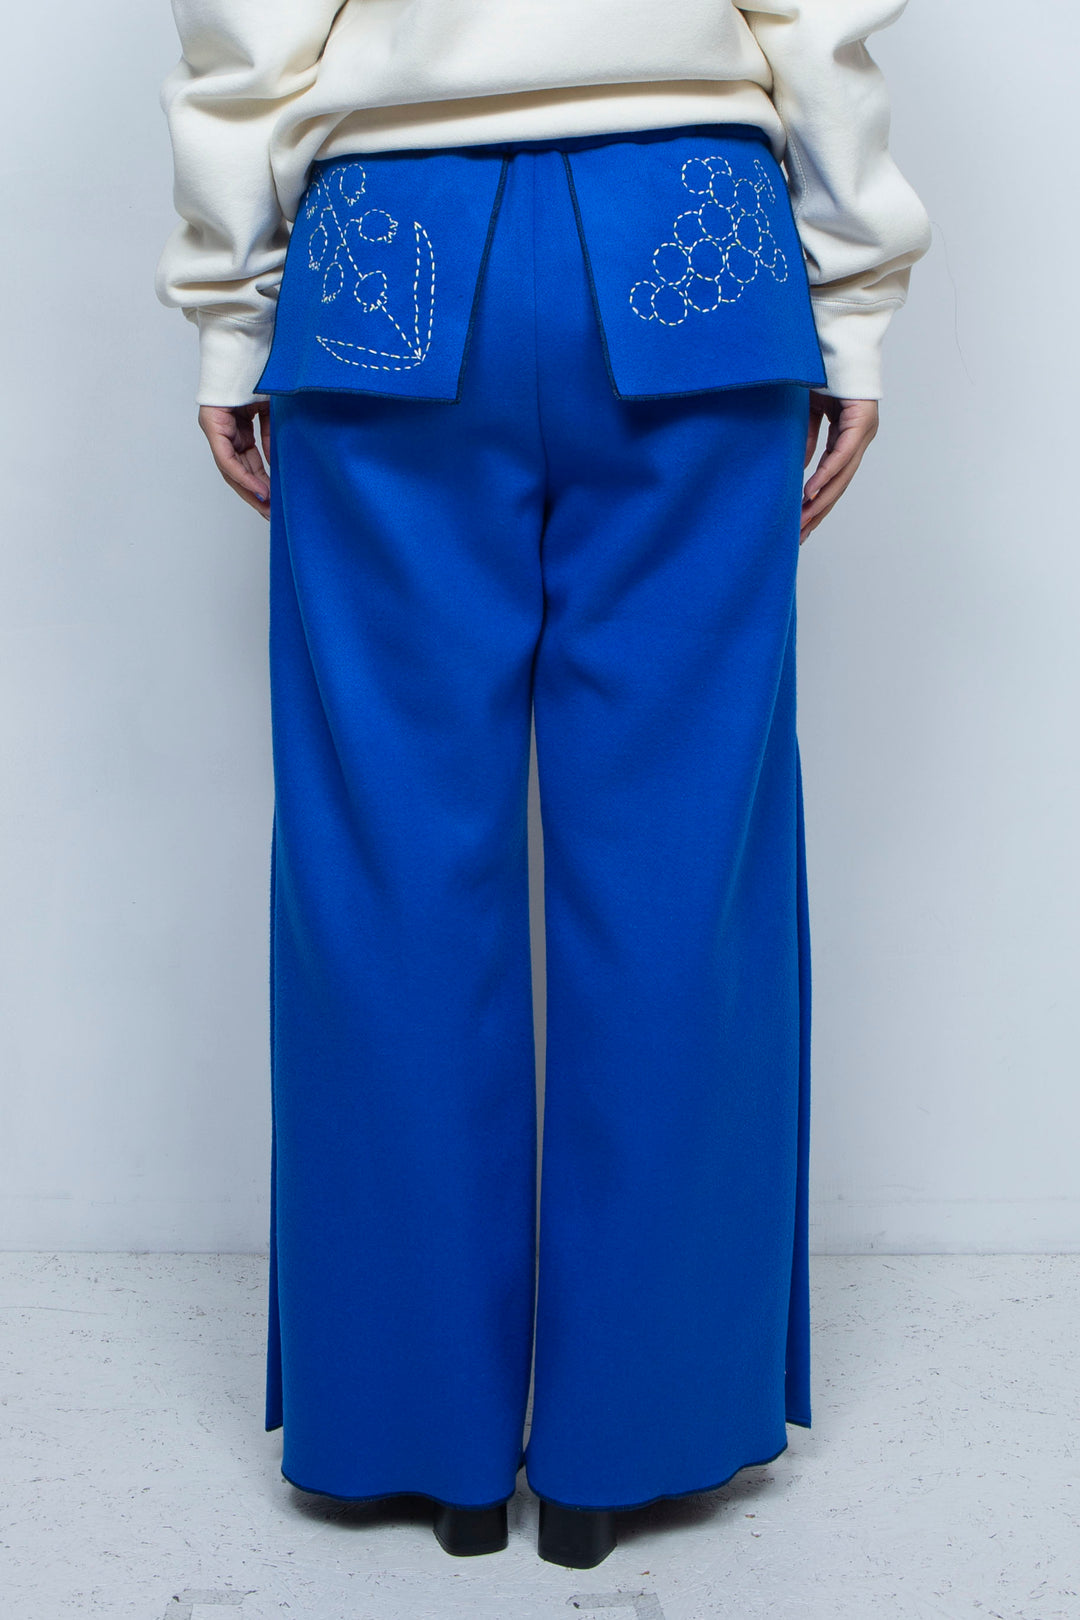 Ghost / embroidery cashmere pajama trousers "Lily of the valley"